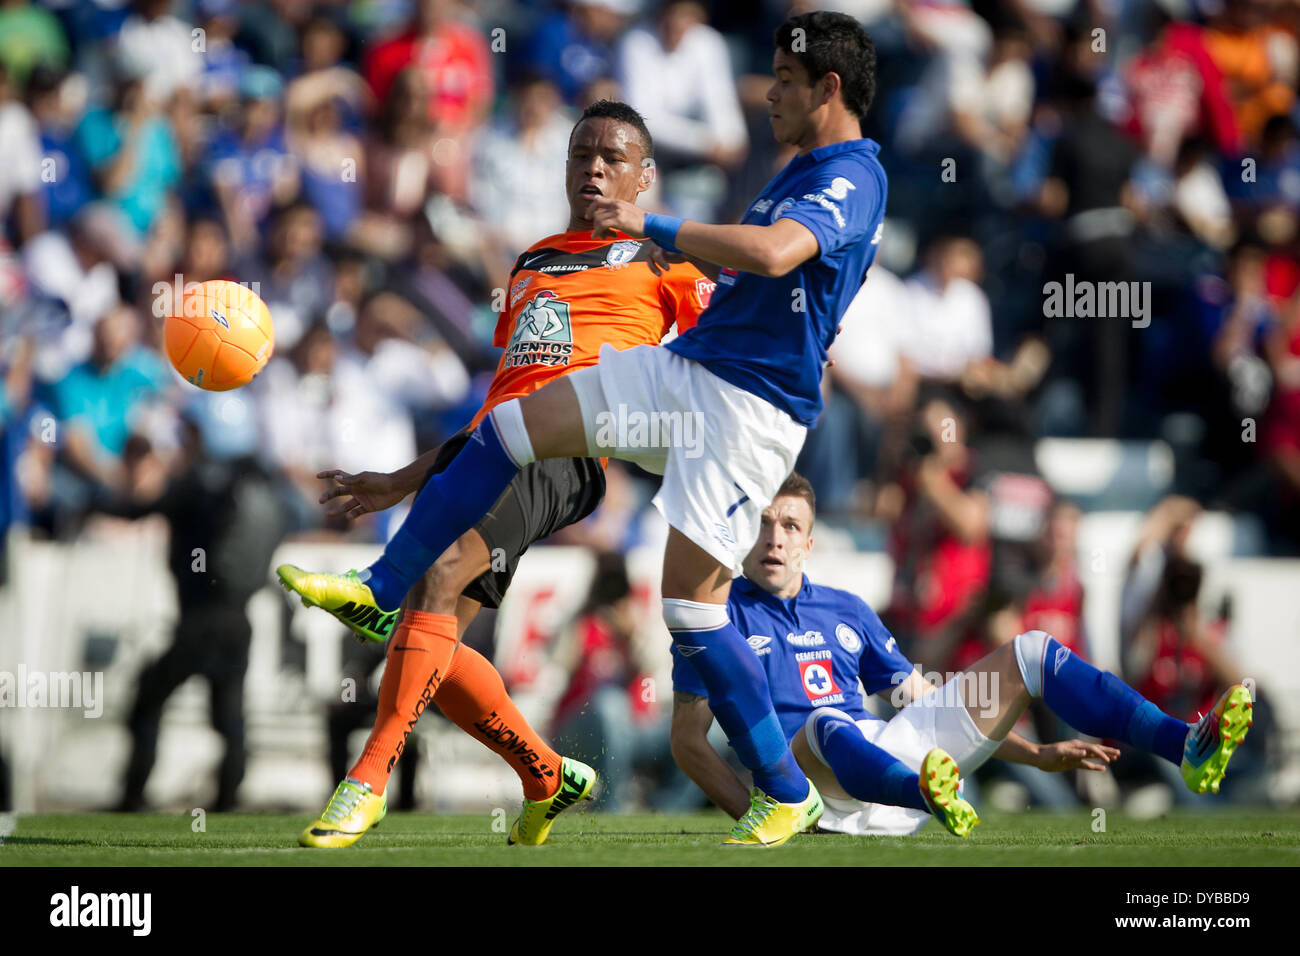 Mexico City, Mexico. 12th Apr, 2014. Cruz Azul's Pablo Barrera (C) vies for the ball with Jhon Freddy Pajoy (L) of Pachuca during a match of the Liga MX held in the Azul Stadium in Mexico City, capital of Mexico, on April 12, 2014. Credit:  Pedro Mera/Xinhua/Alamy Live News Stock Photo